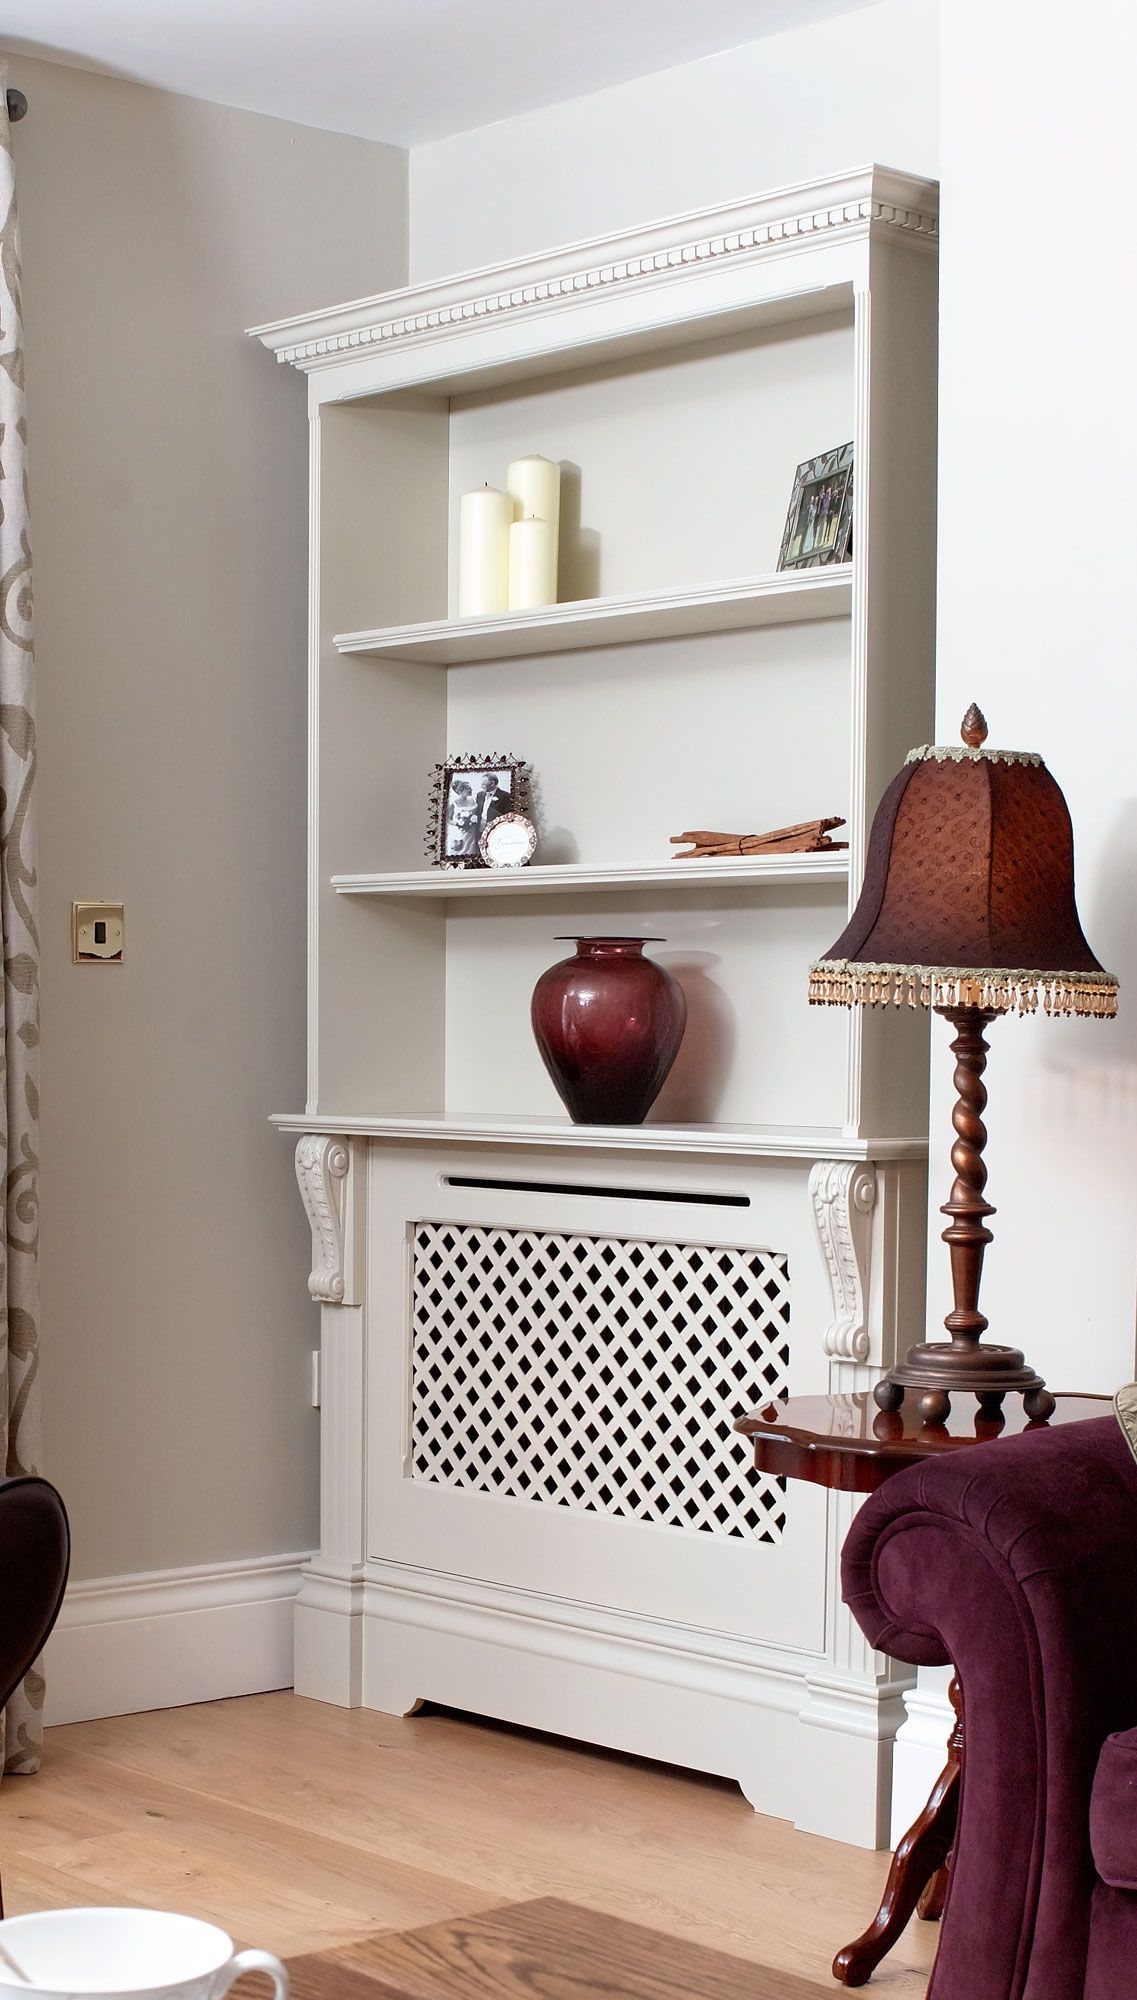 Modern Interior Decorating With Colorful Radiators And Attractive Pertaining To Radiator Cover Bookcase (View 2 of 15)